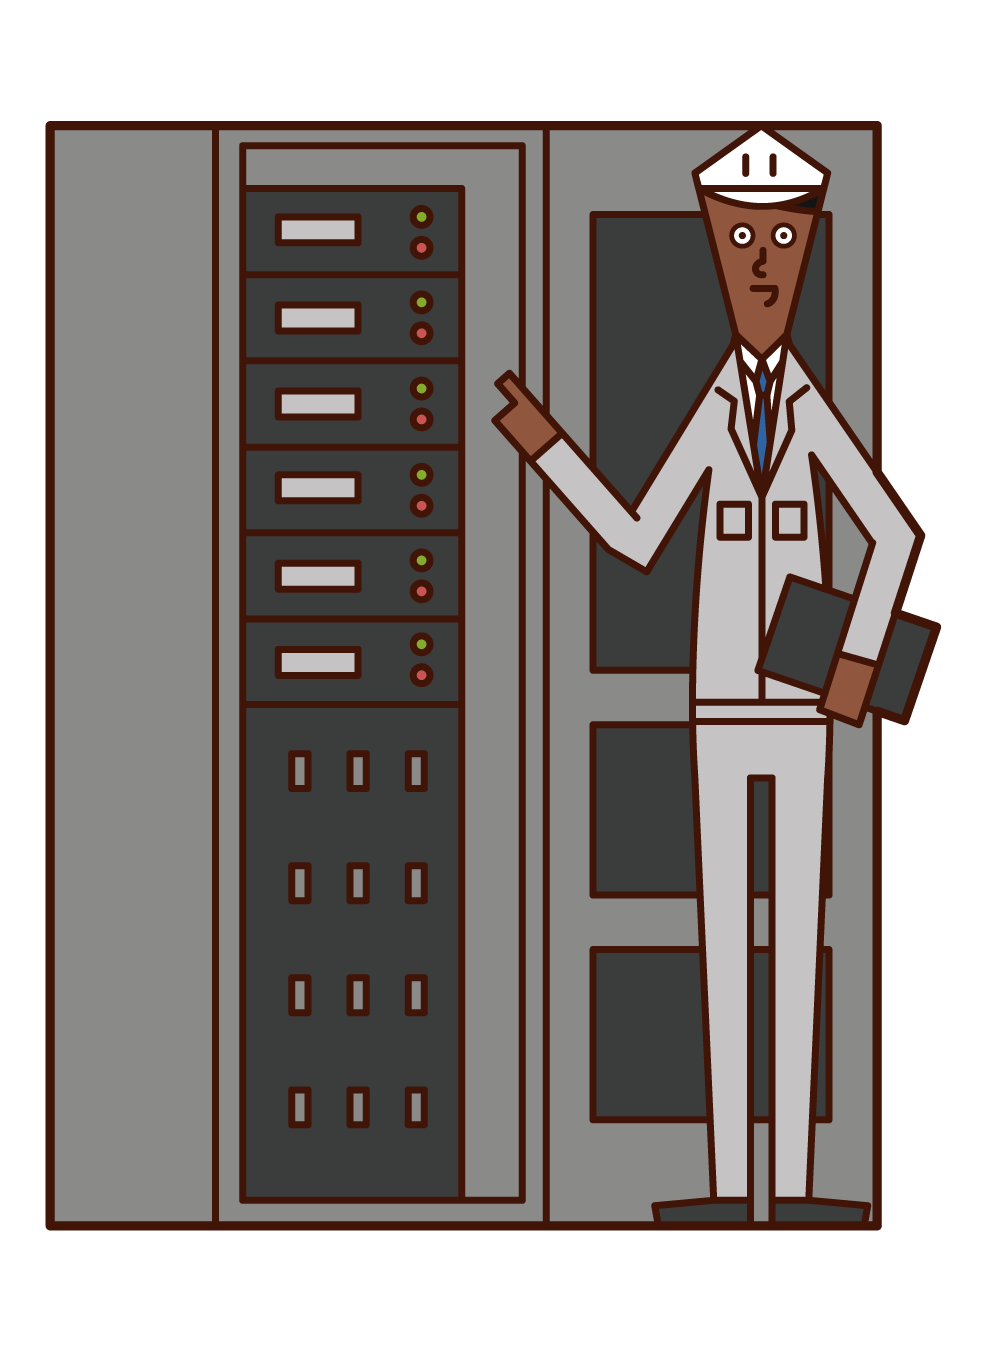 Illustration of a man who maintains and inspects equipment